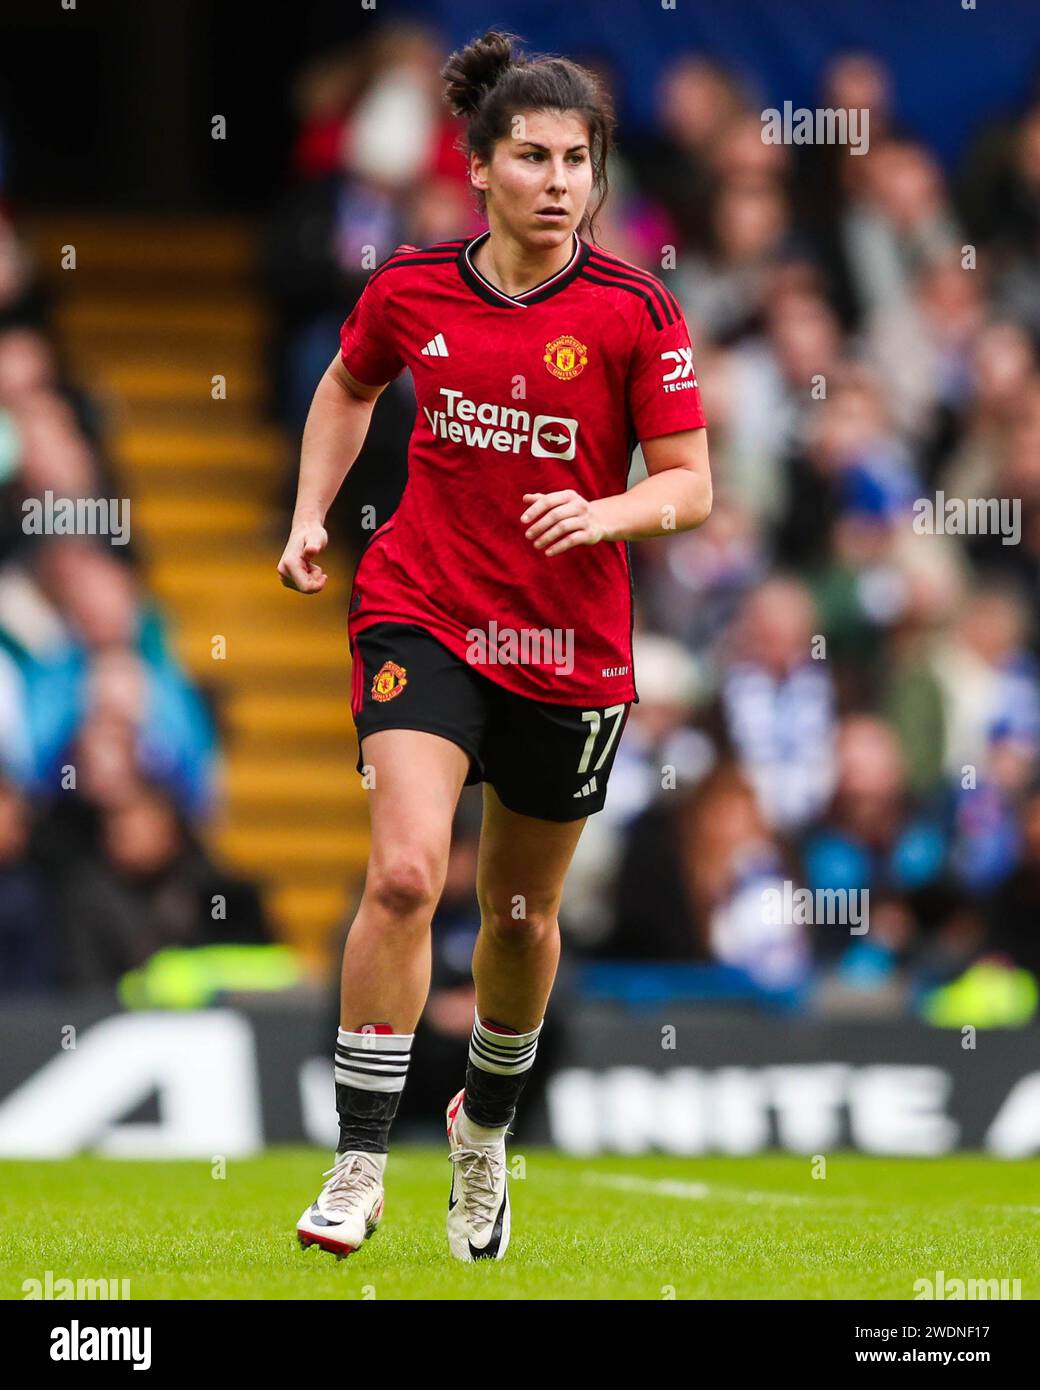 London, England, United Kingdom on 21 January 2024. Manchester United's Lucia Garcia in action during the Chelsea Women v Manchester United Women Barclays Women's Super League match at Stamford Bridge, London, England, United Kingdom on 21 January 2024 Credit: Every Second Media/Alamy Live News Stock Photo